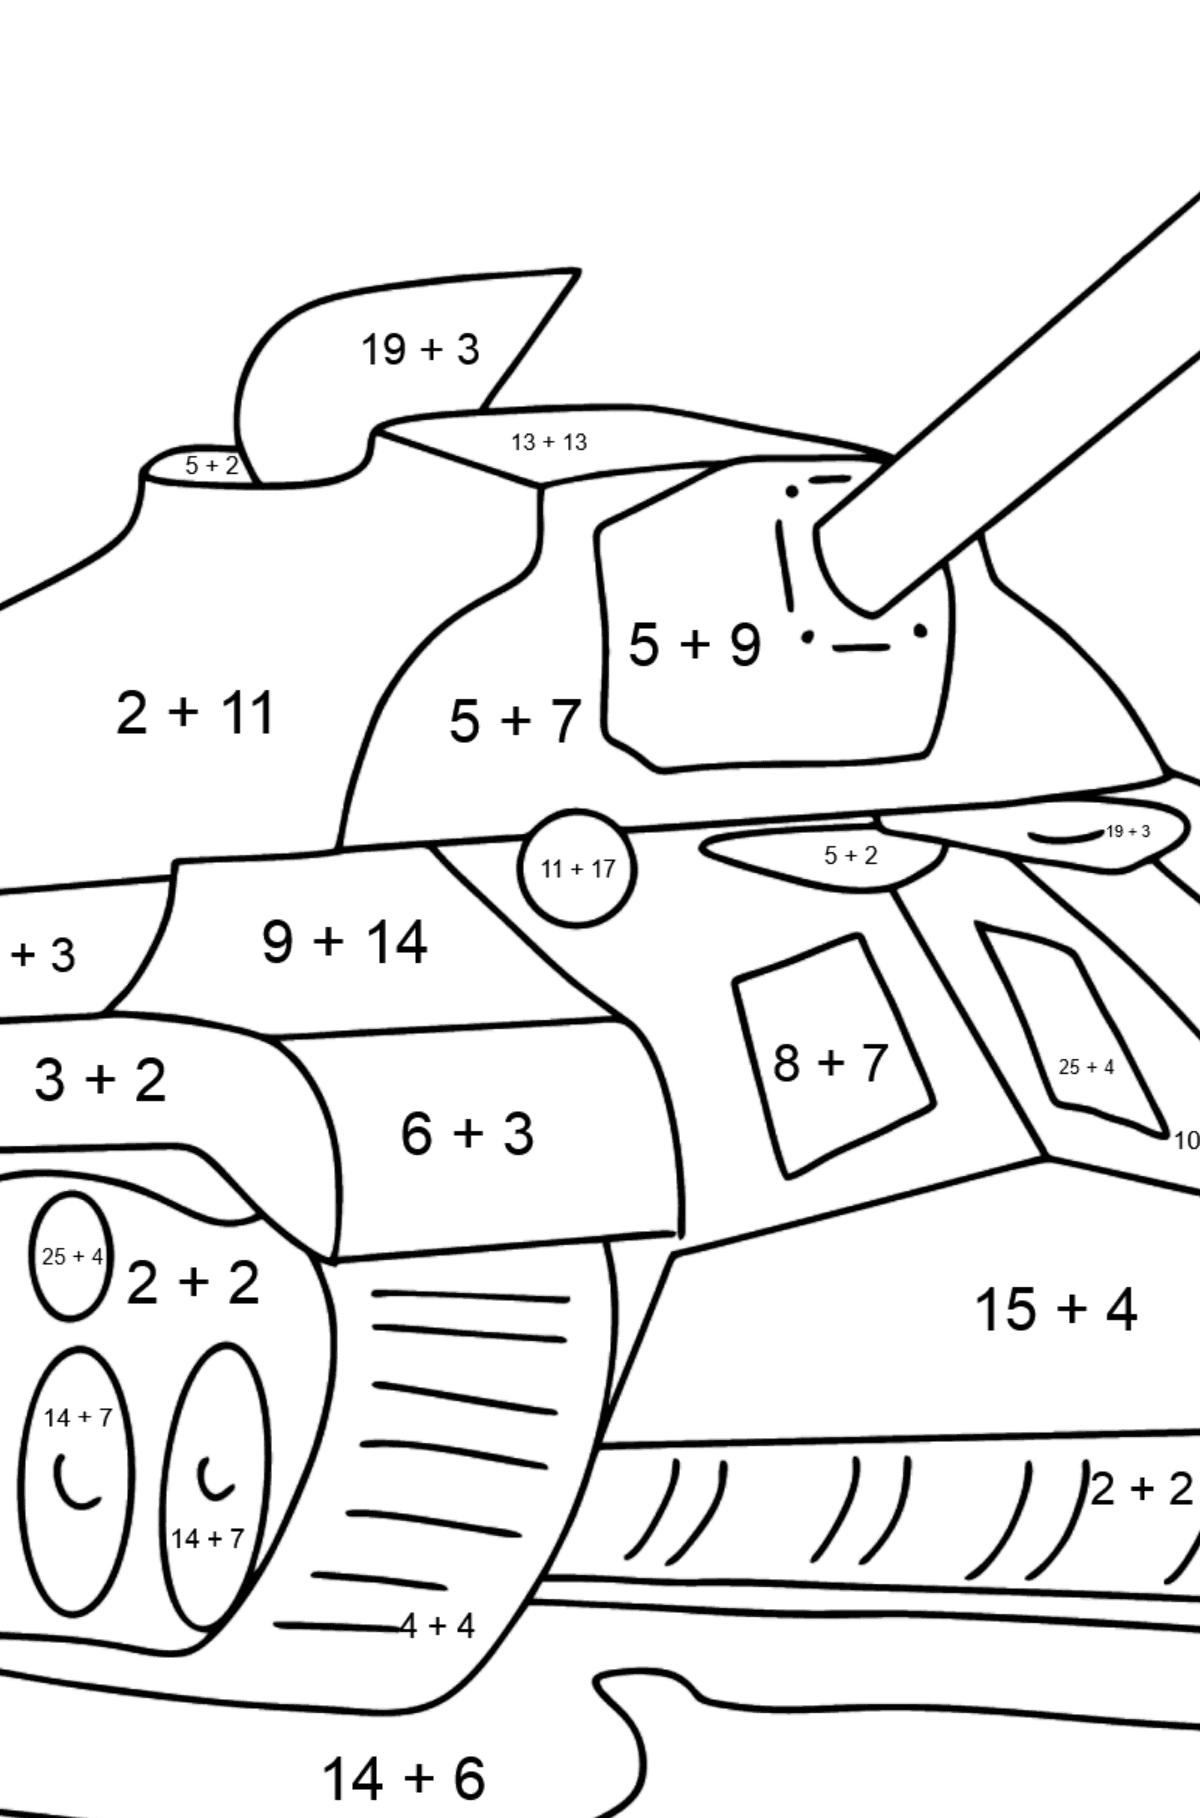 Tank IS 3 coloring page - Math Coloring - Addition for Kids